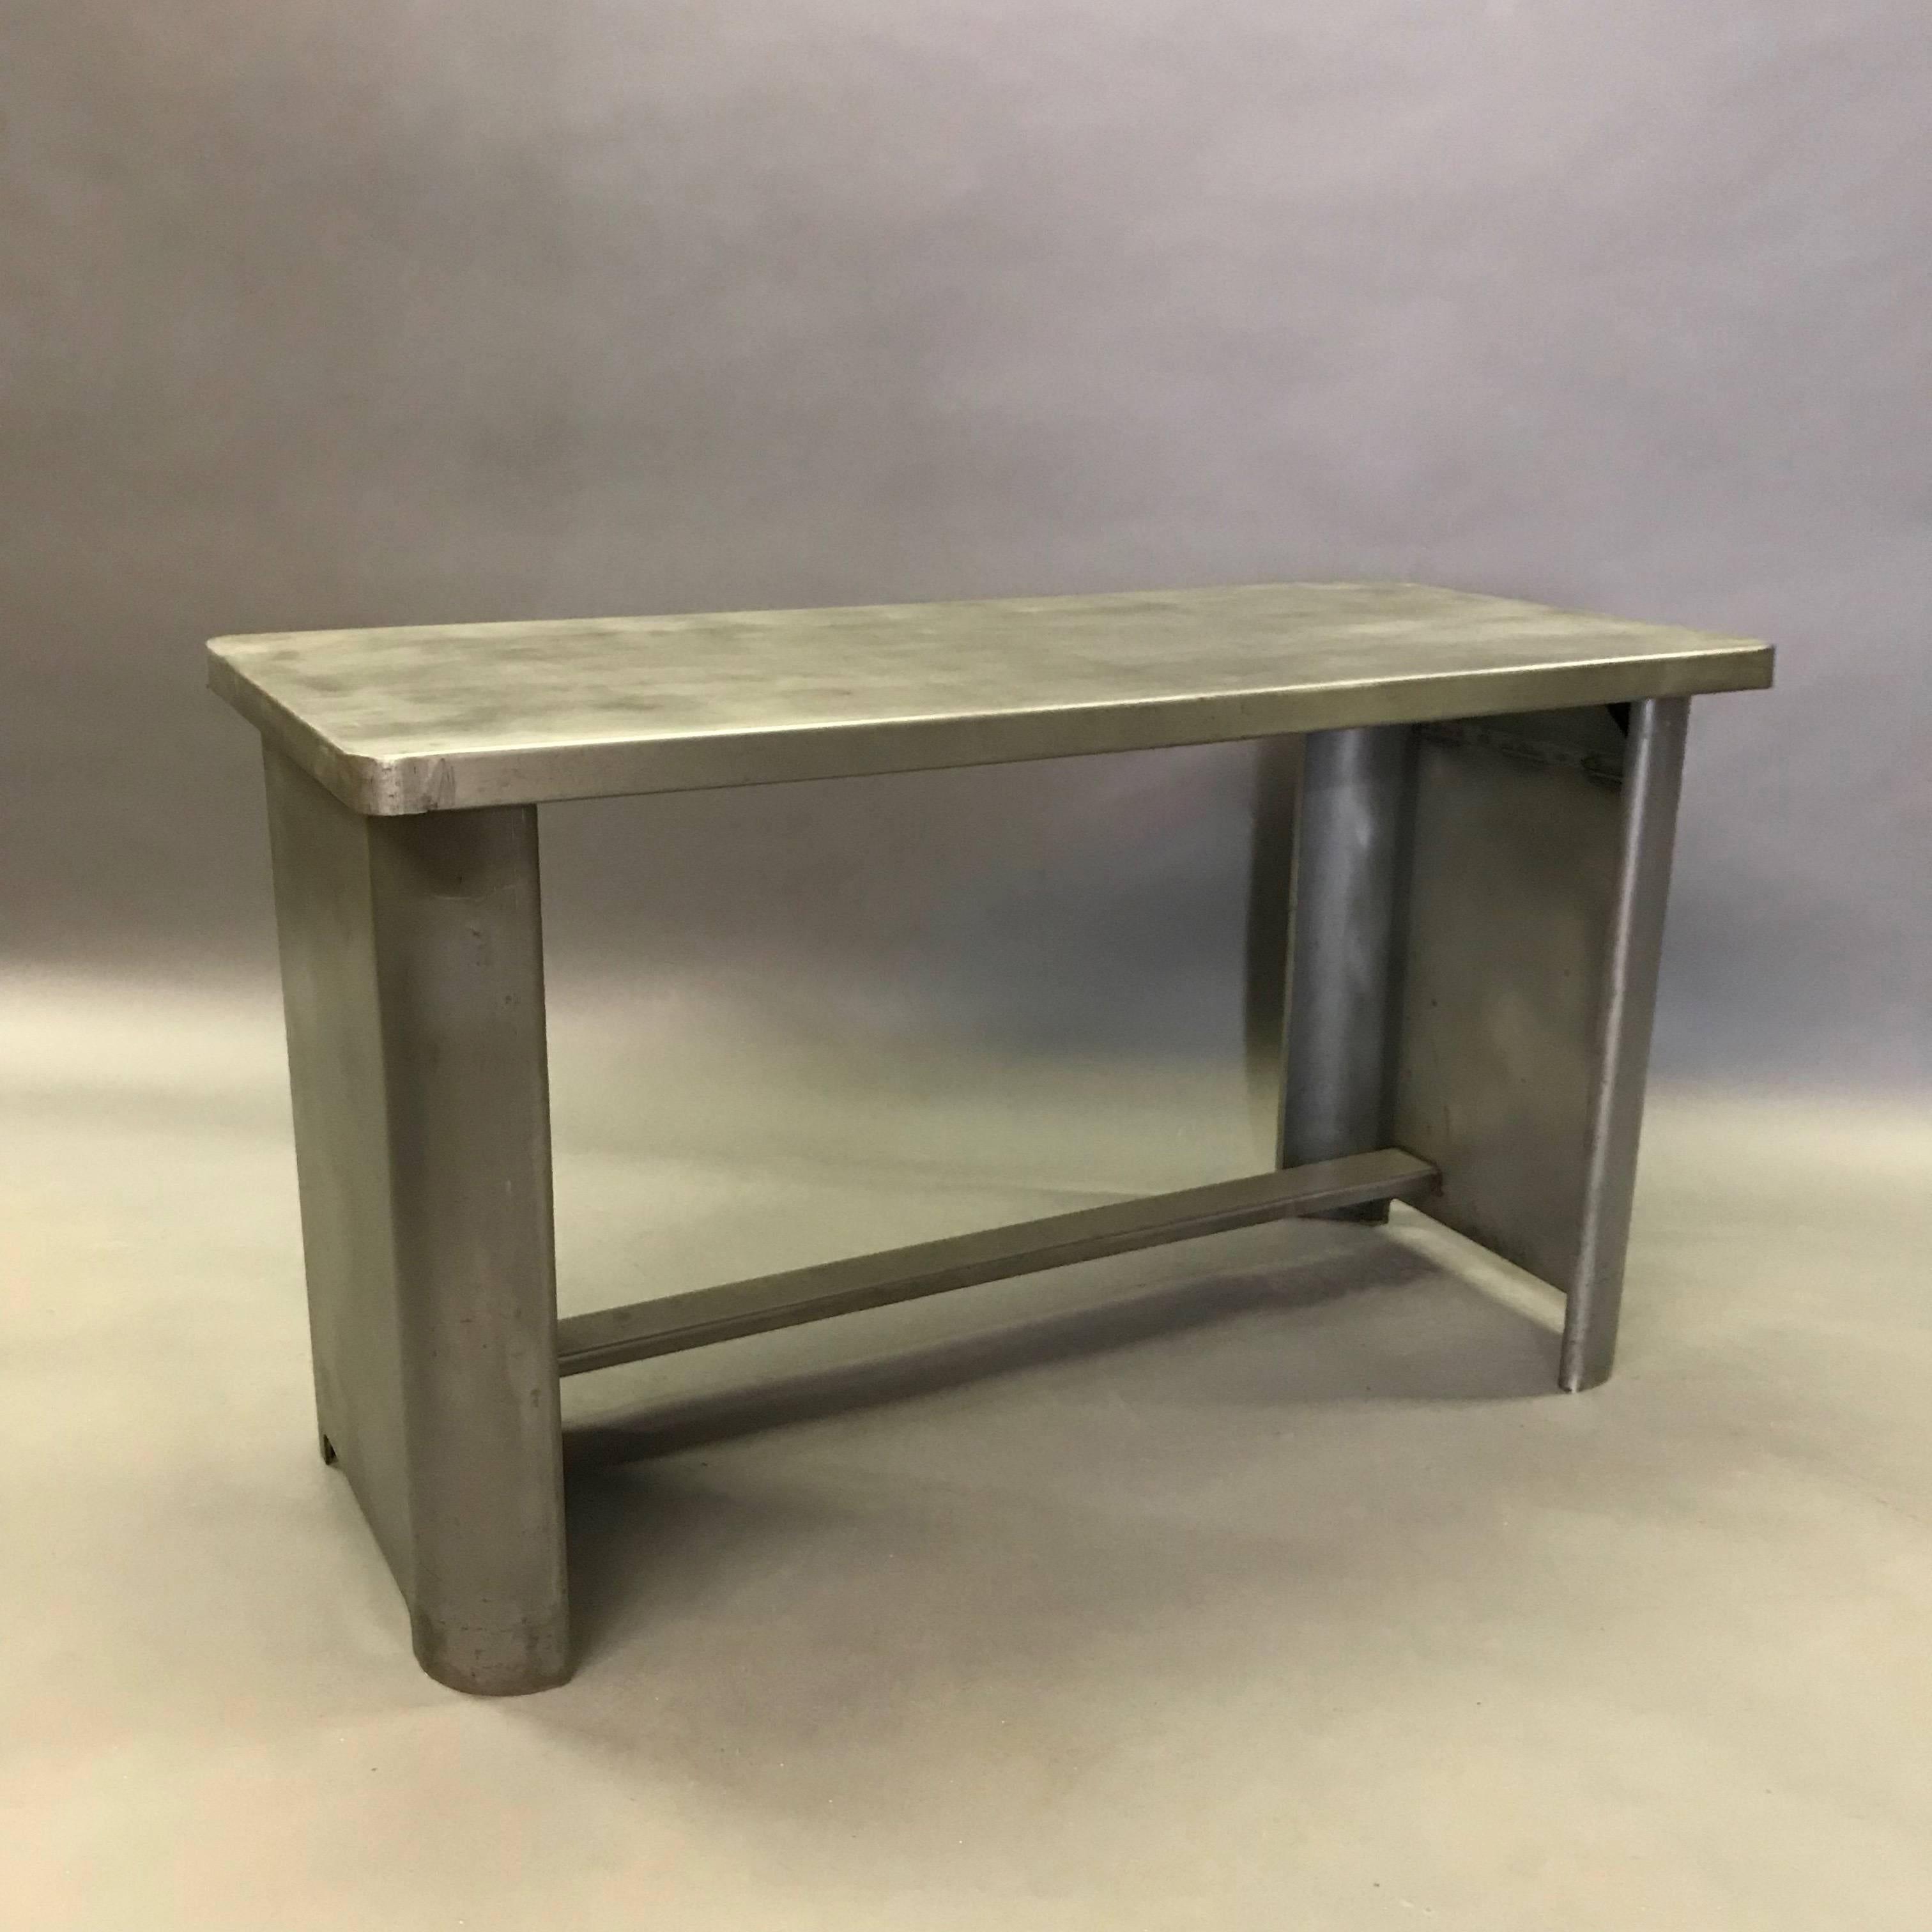 Industrial, 1940s, brushed steel, prep work table or desk features rounded machine-age lines.